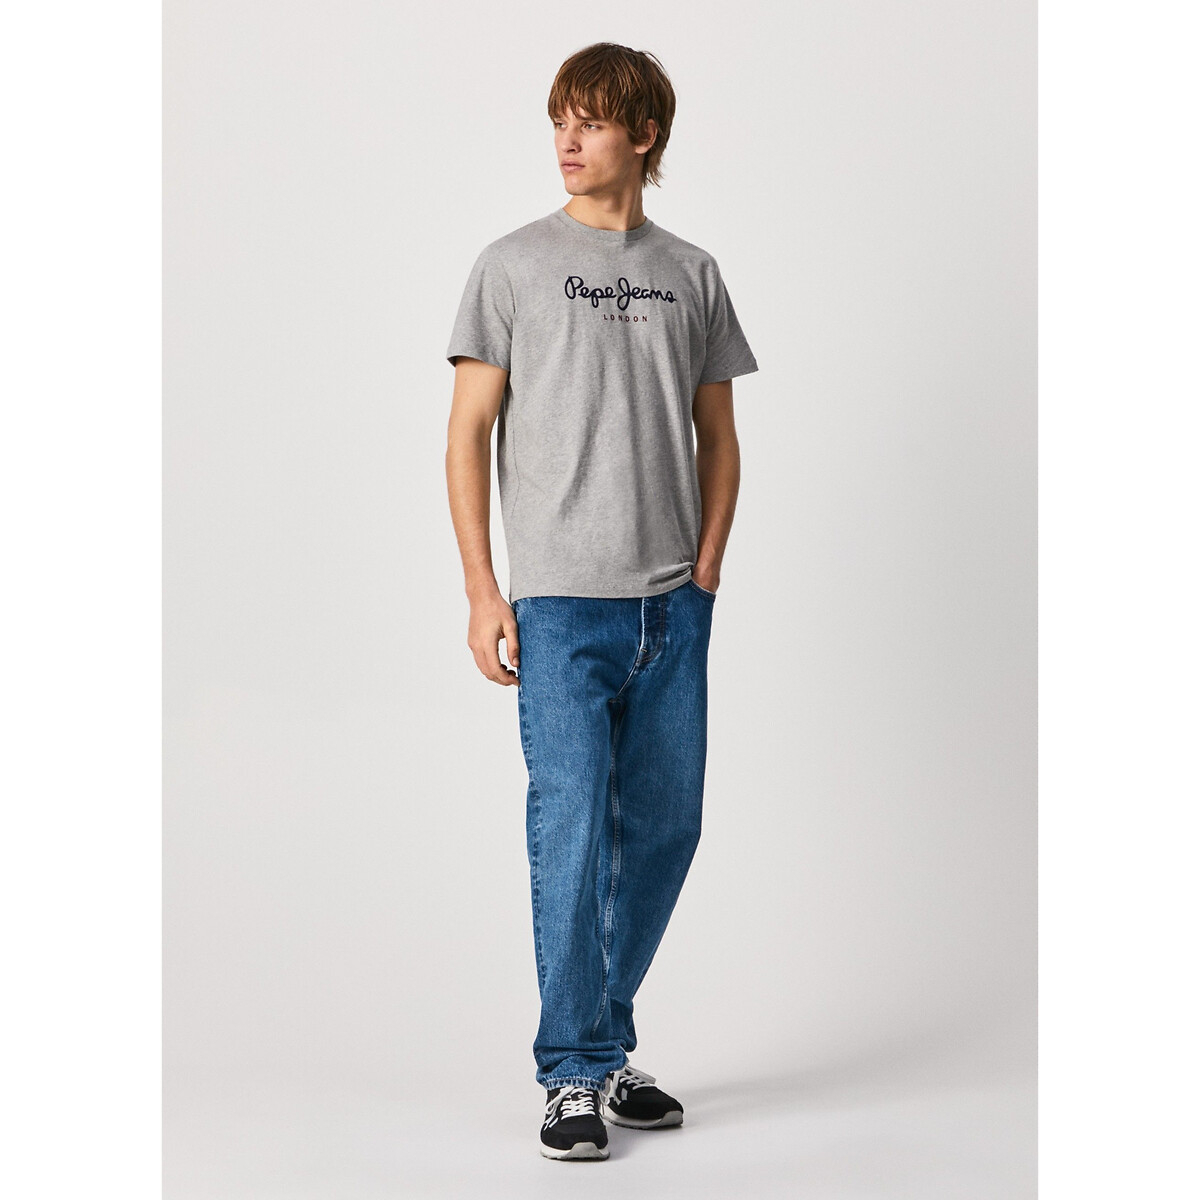 Eggo logo in cotton neck Pepe Redoute with La crew | print Jeans t-shirt